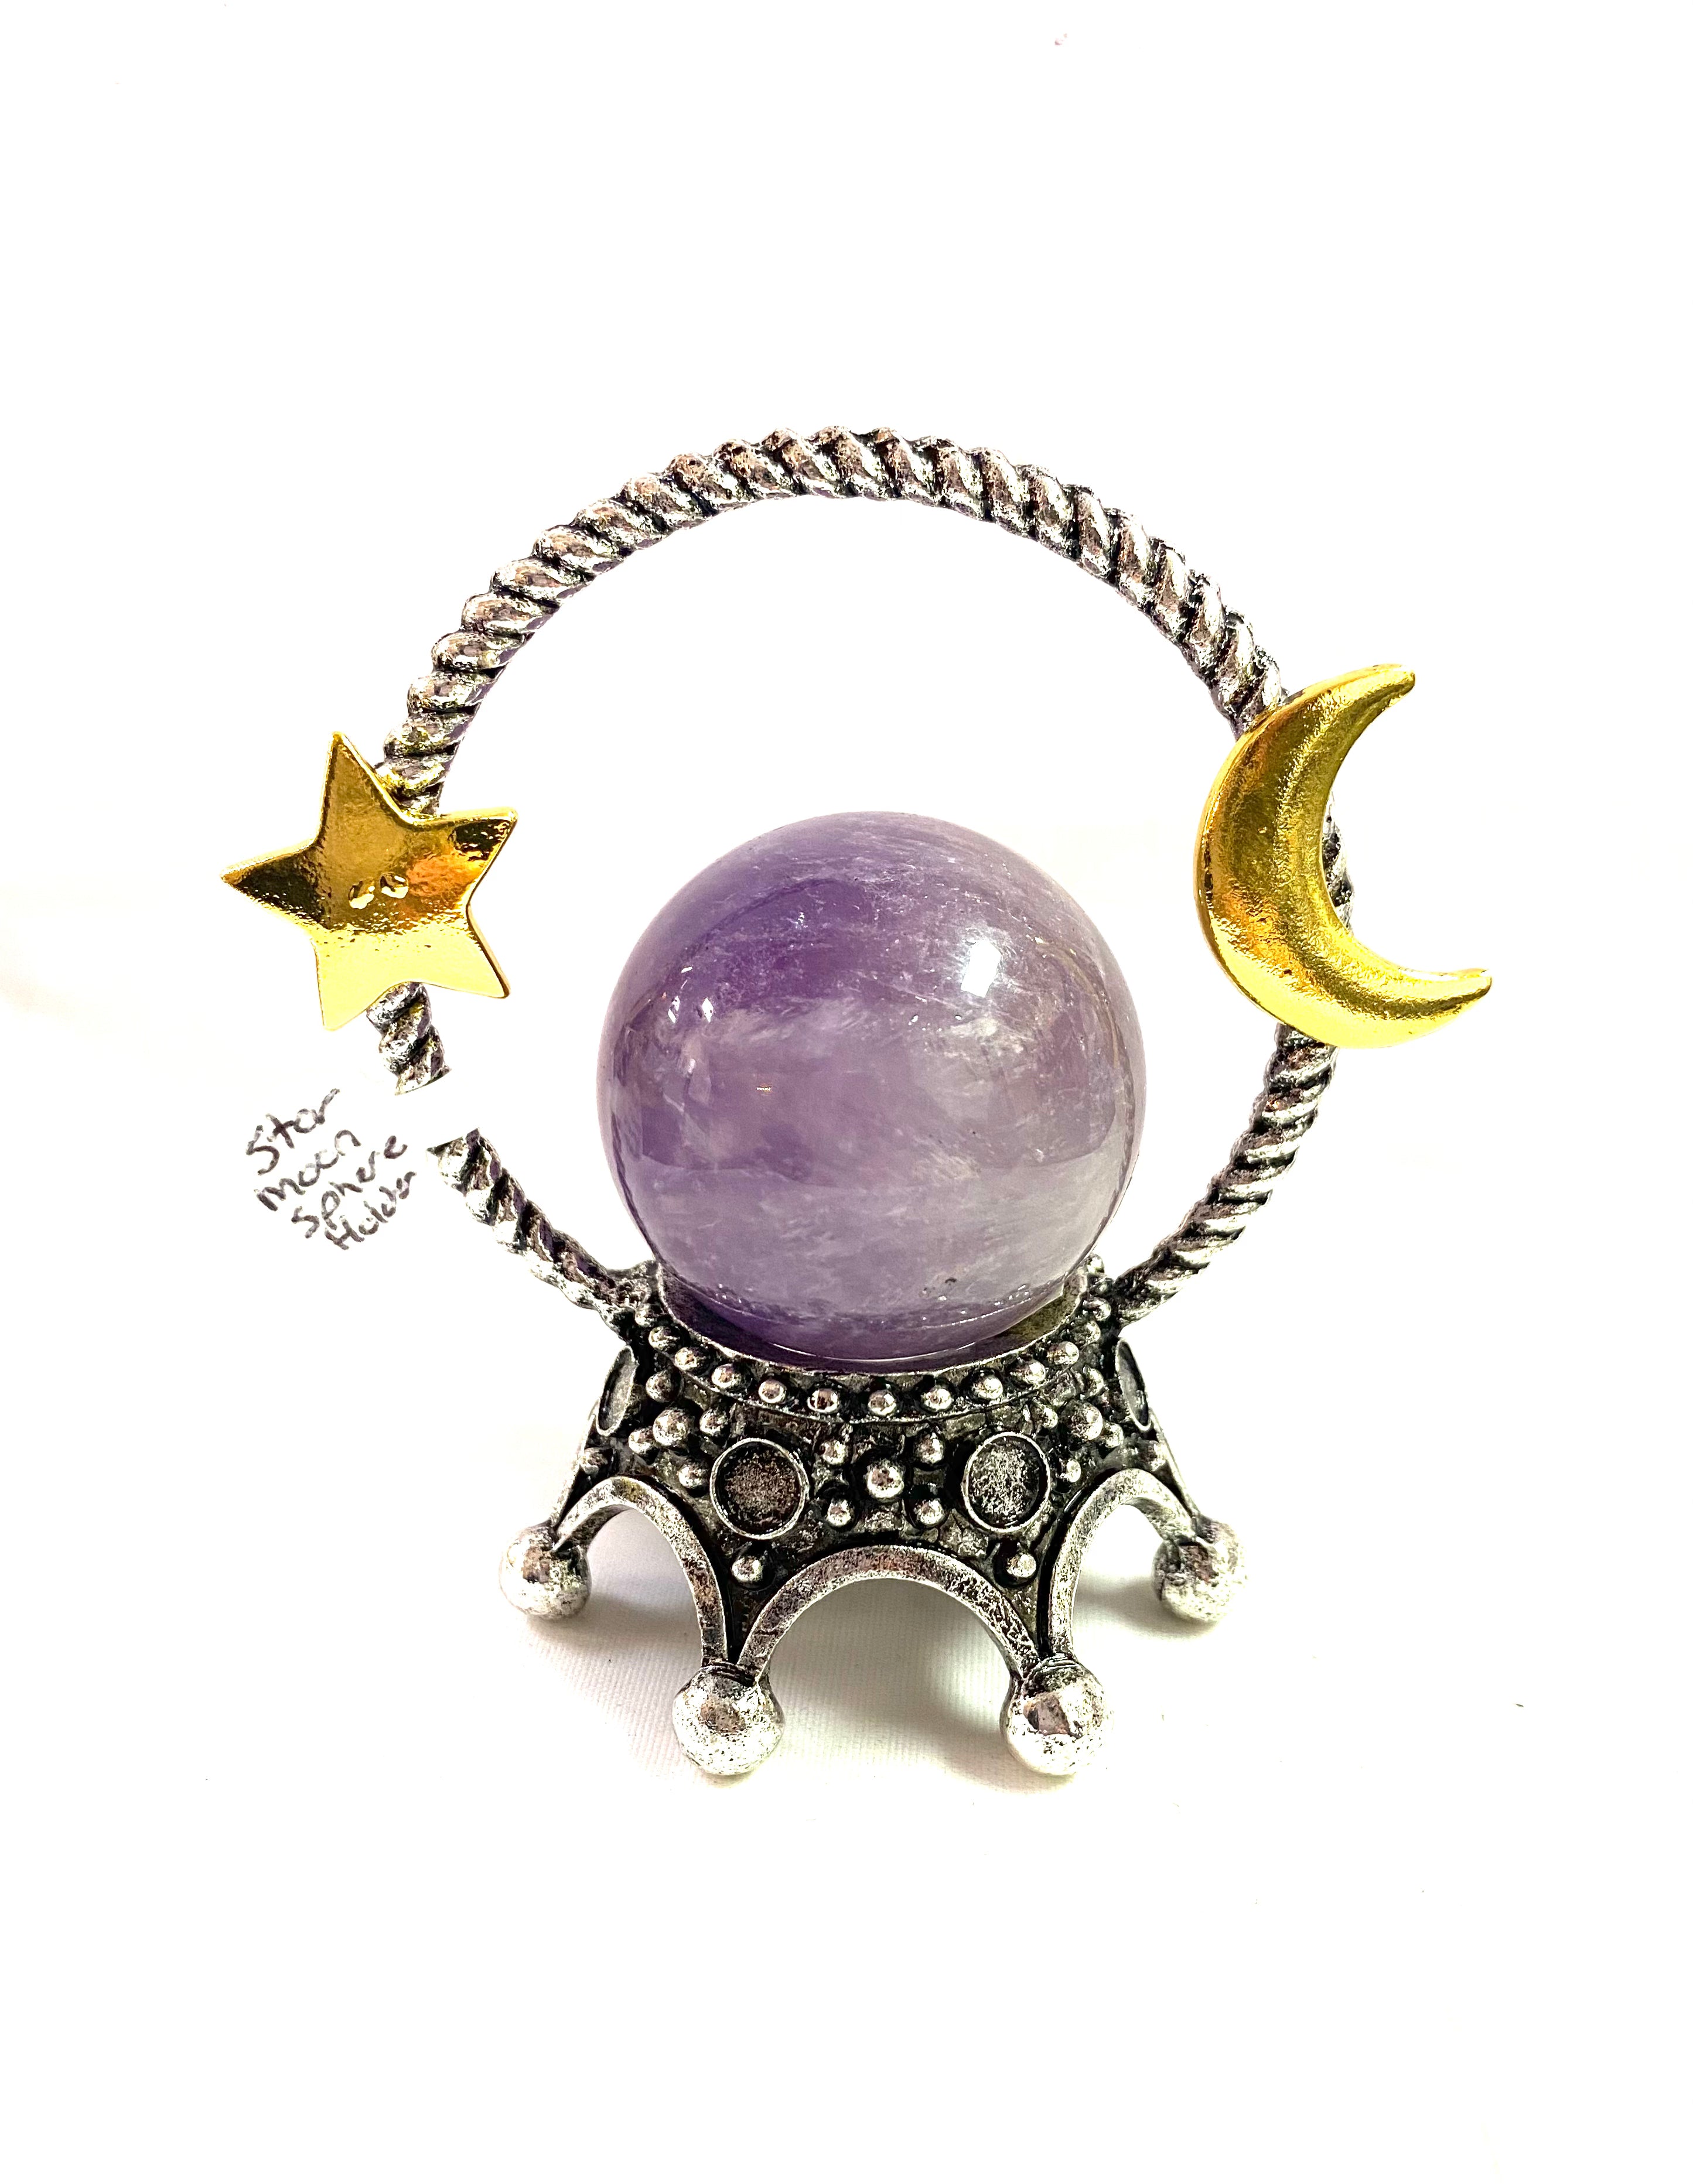 Star and Moon Sphere Stand Holder - Lighten Up Shop